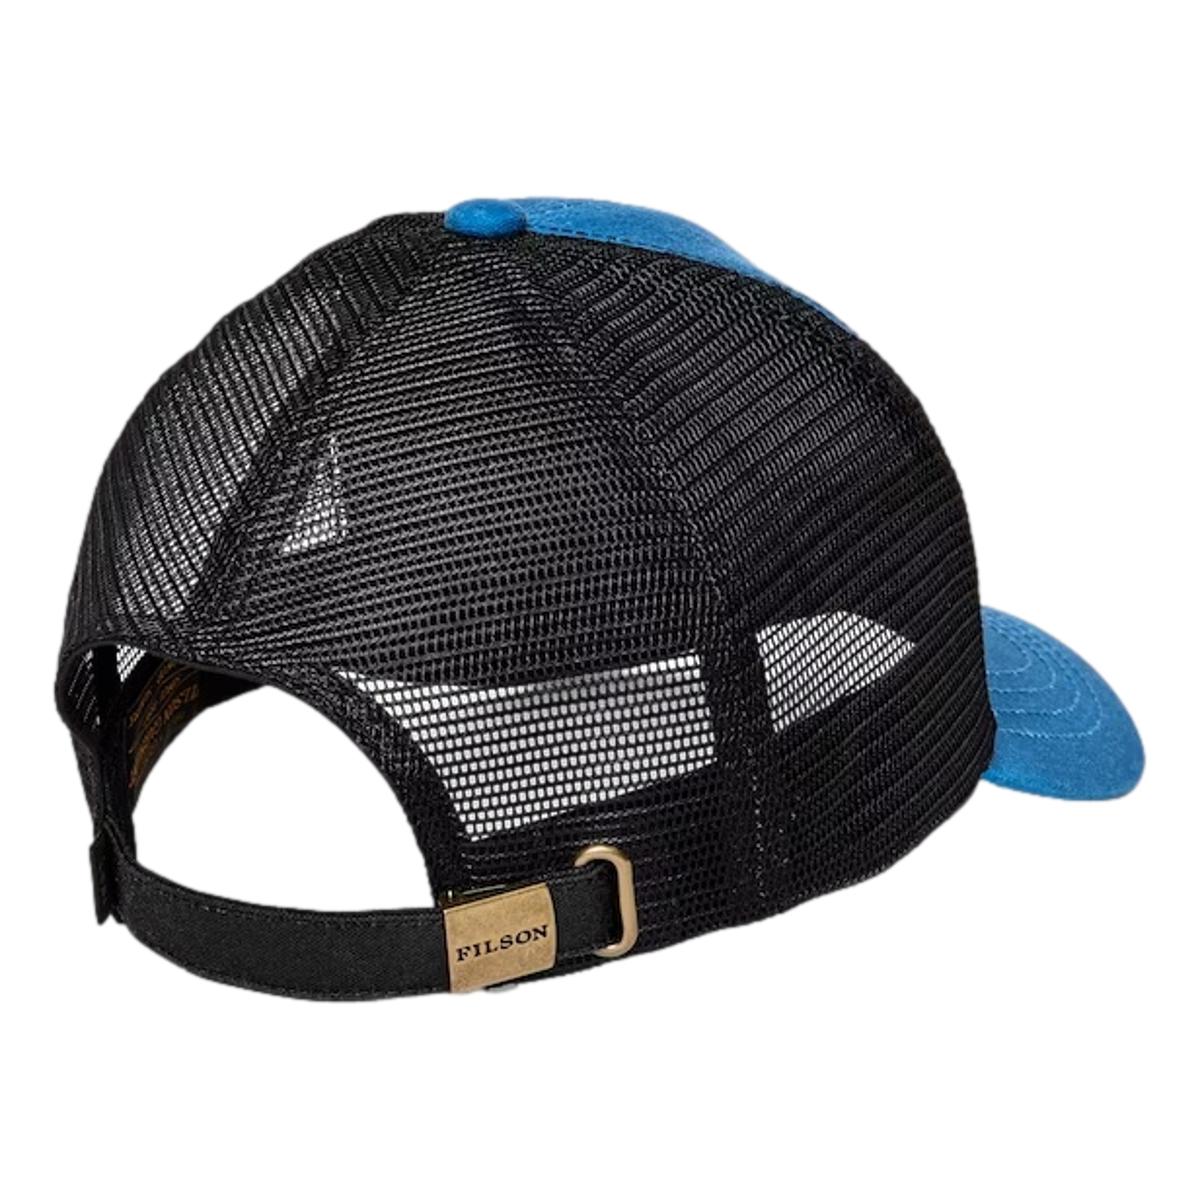 Filson Logger Mesh Cap Black, a durable cap with mesh back for breathable  comfort